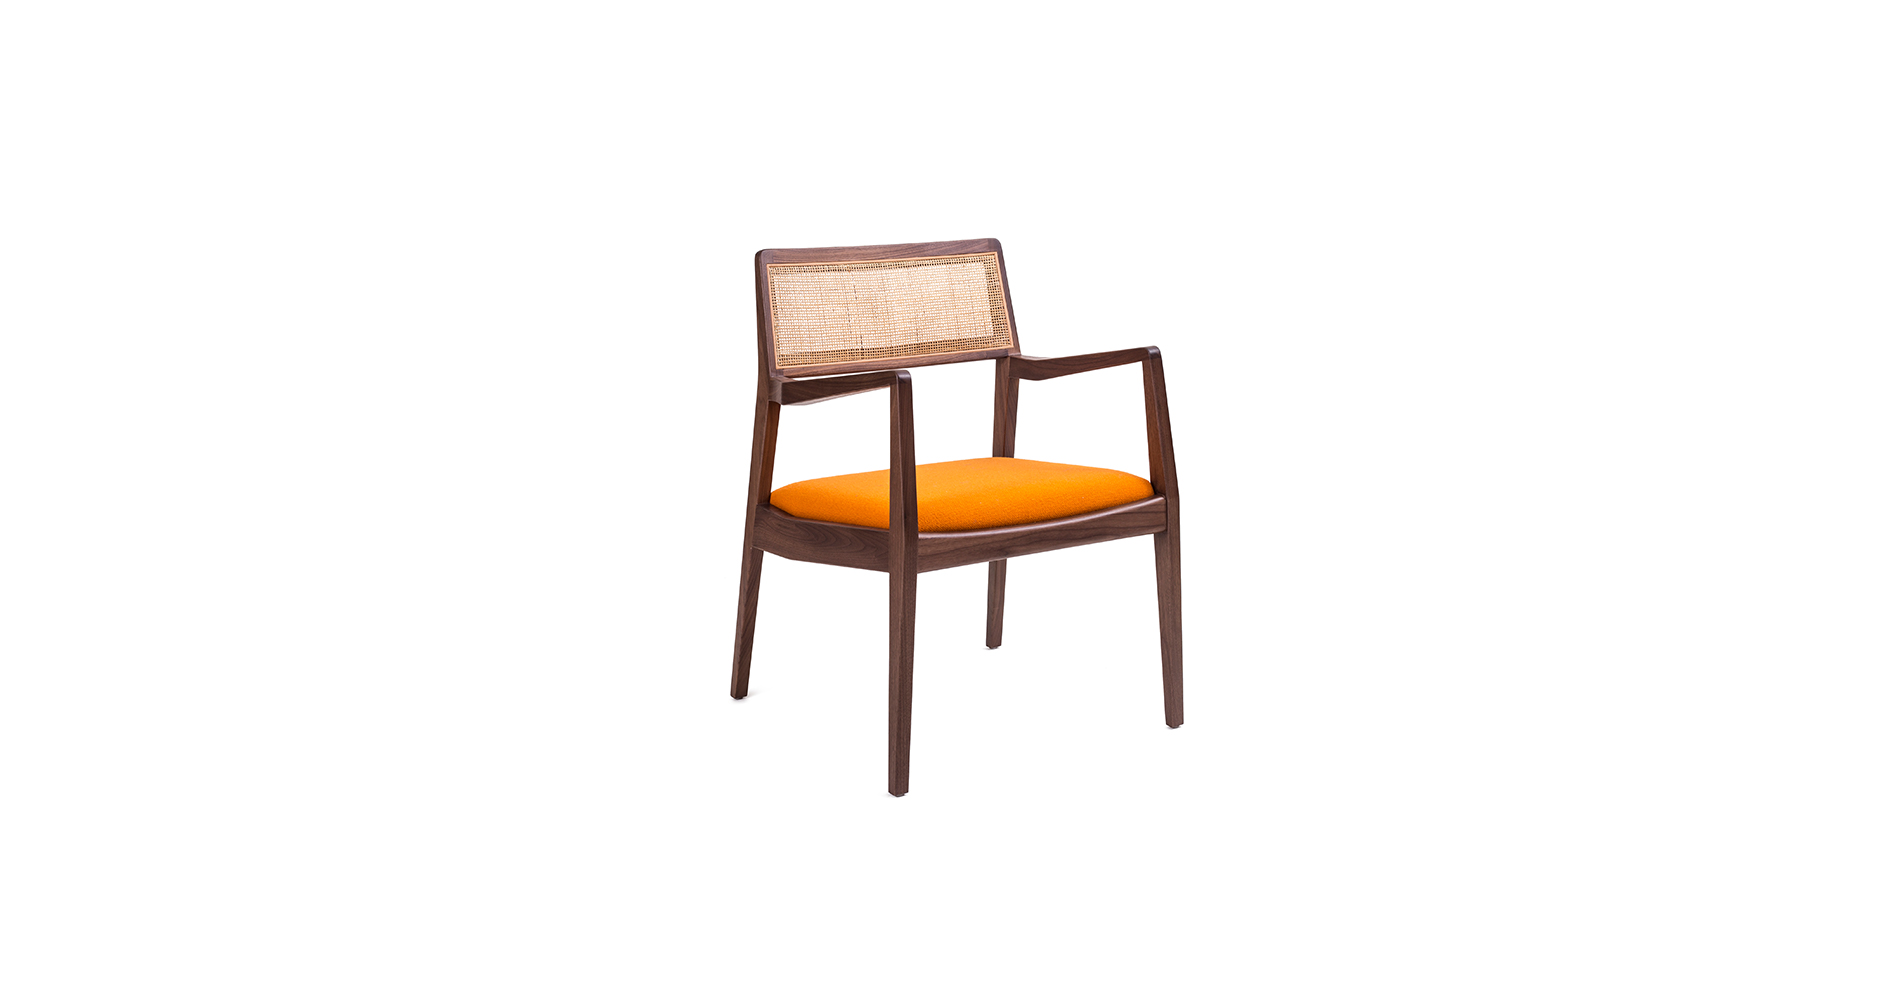 An image of Risom Chair